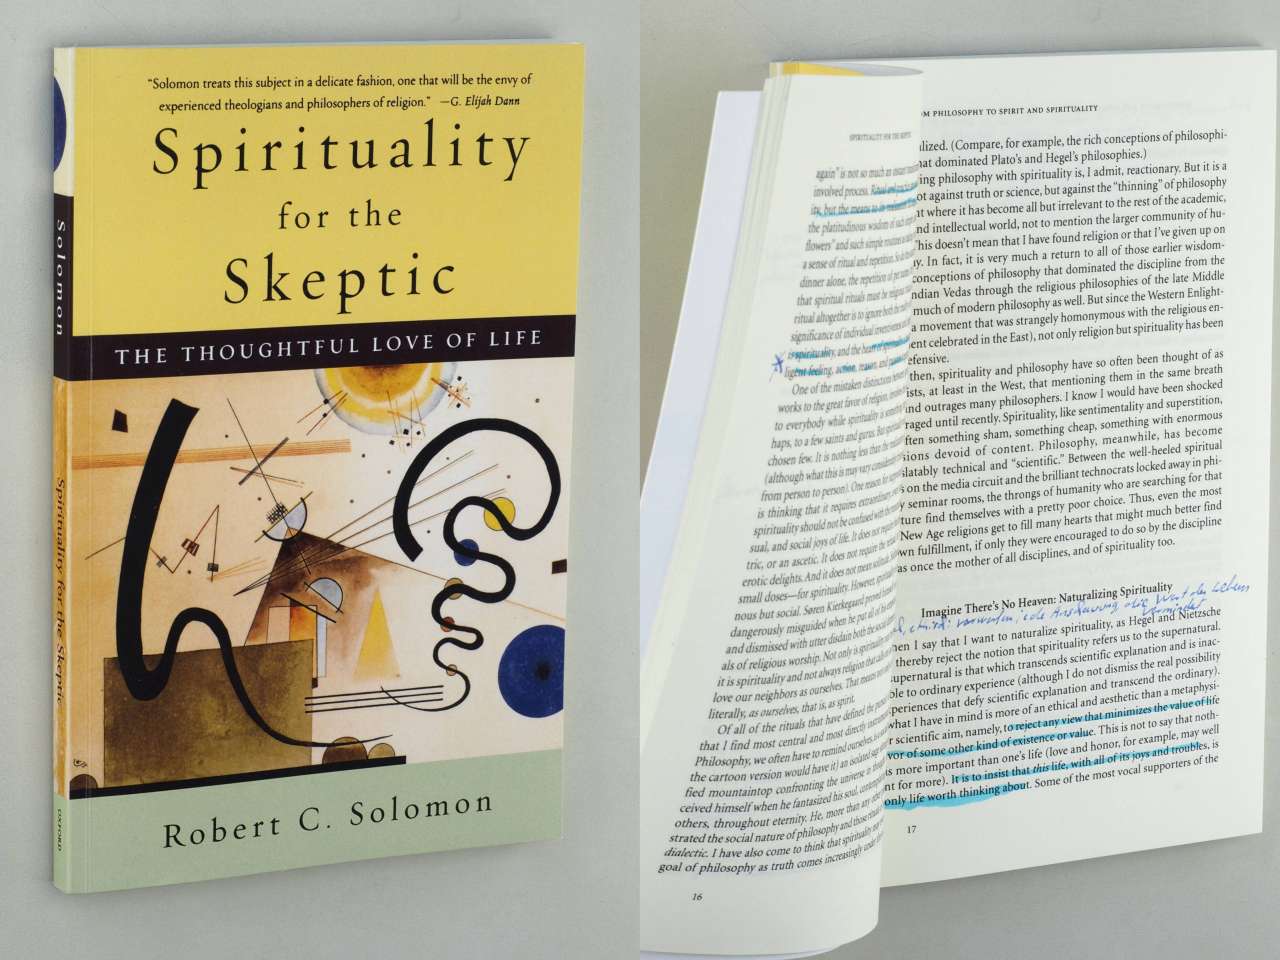 Spirituality for the skeptic. the thoughtful love of life. - Solomon, Robert C.